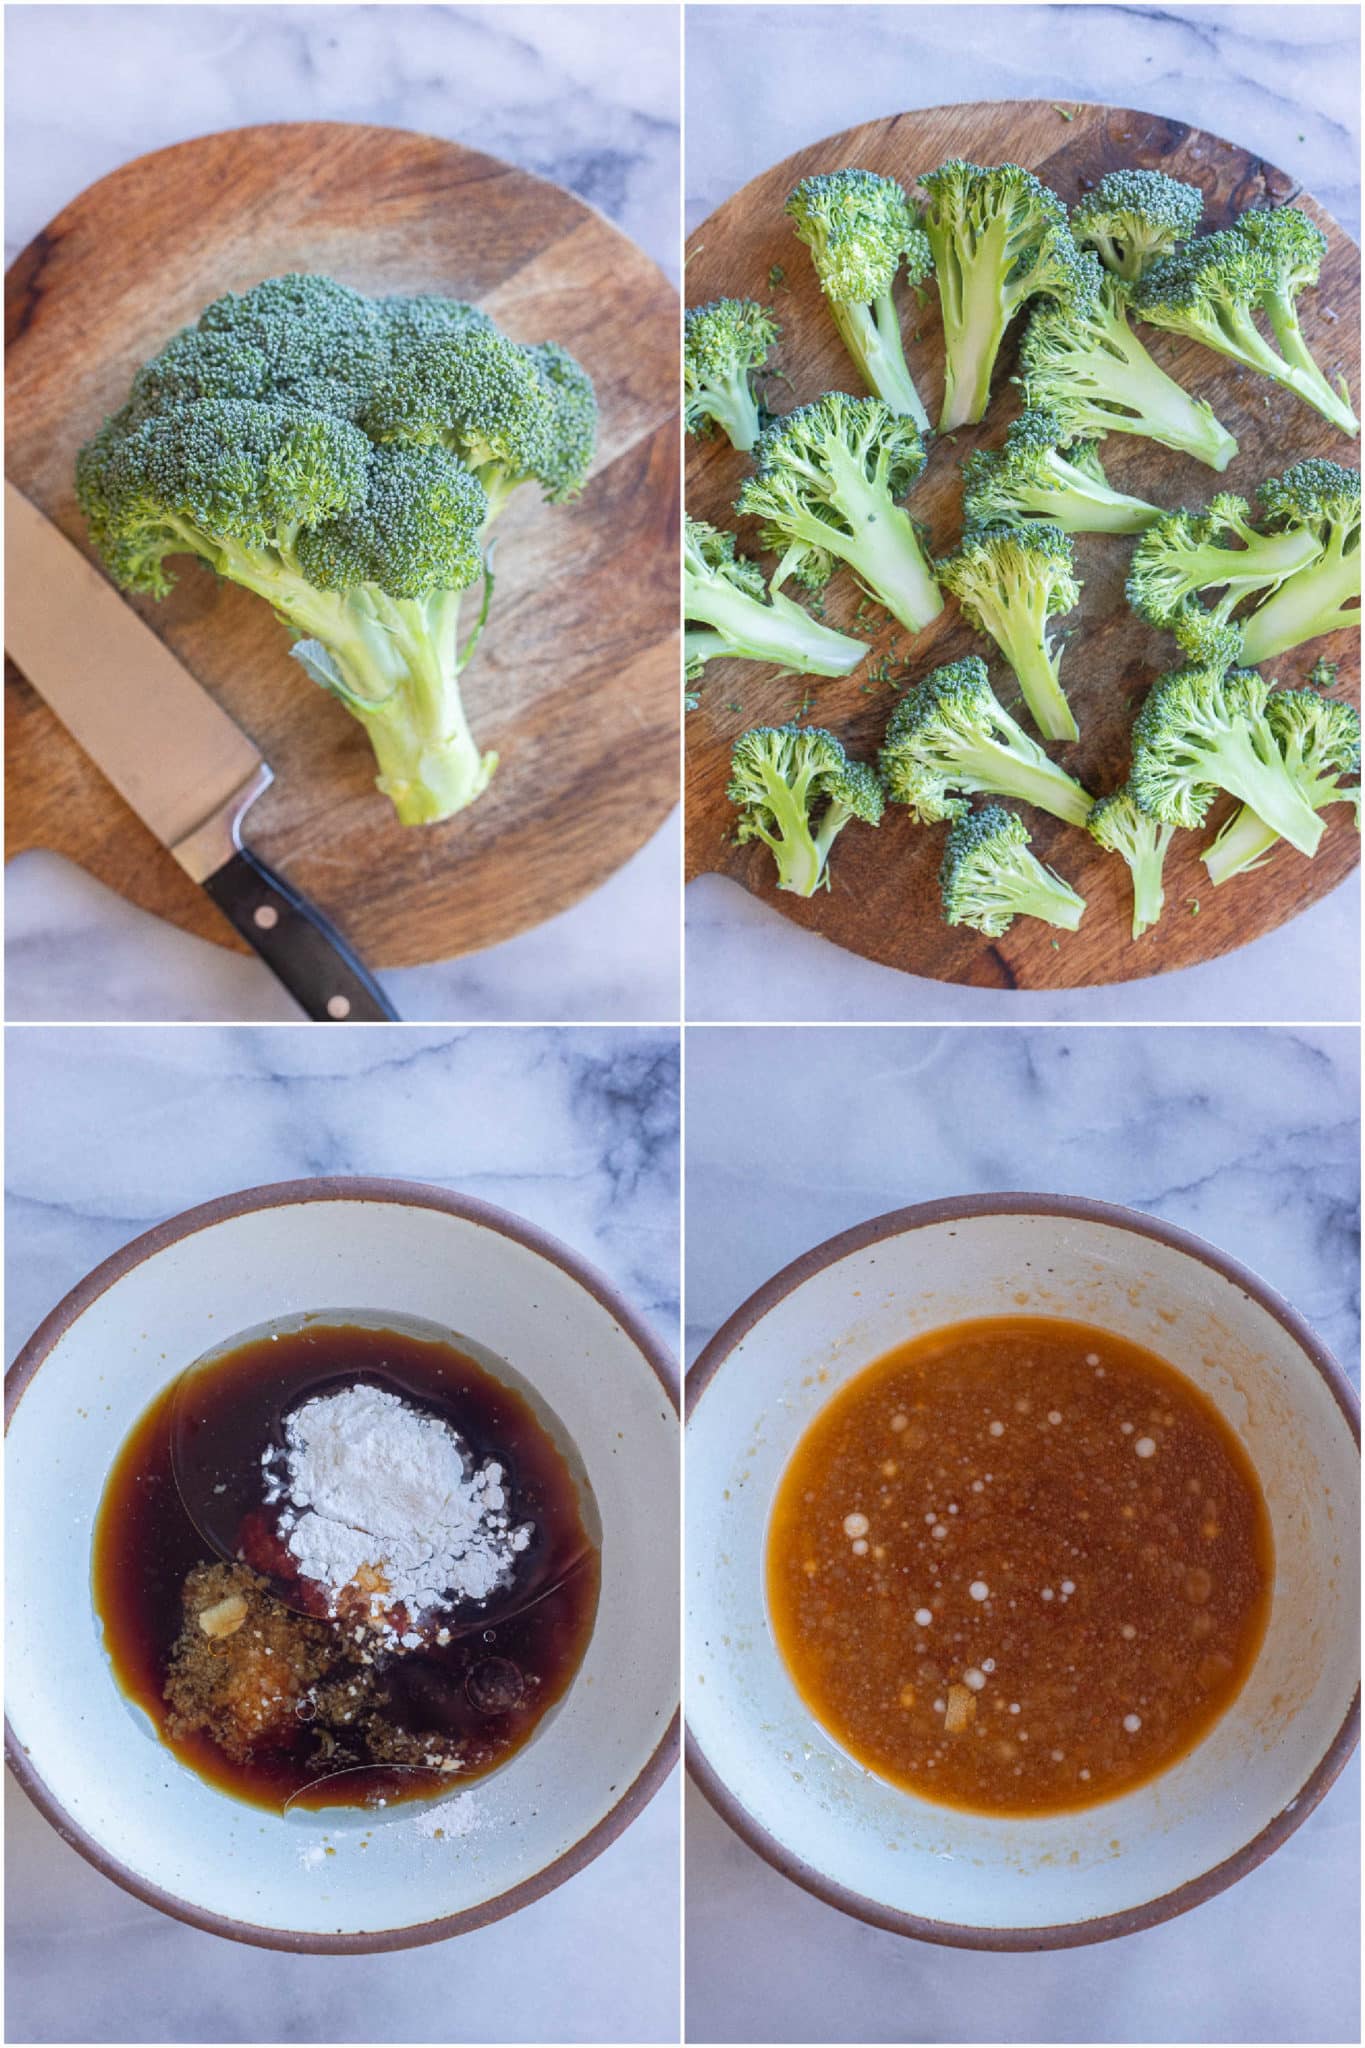 showing how to prepare the broccoli and the chili garlic sauce.